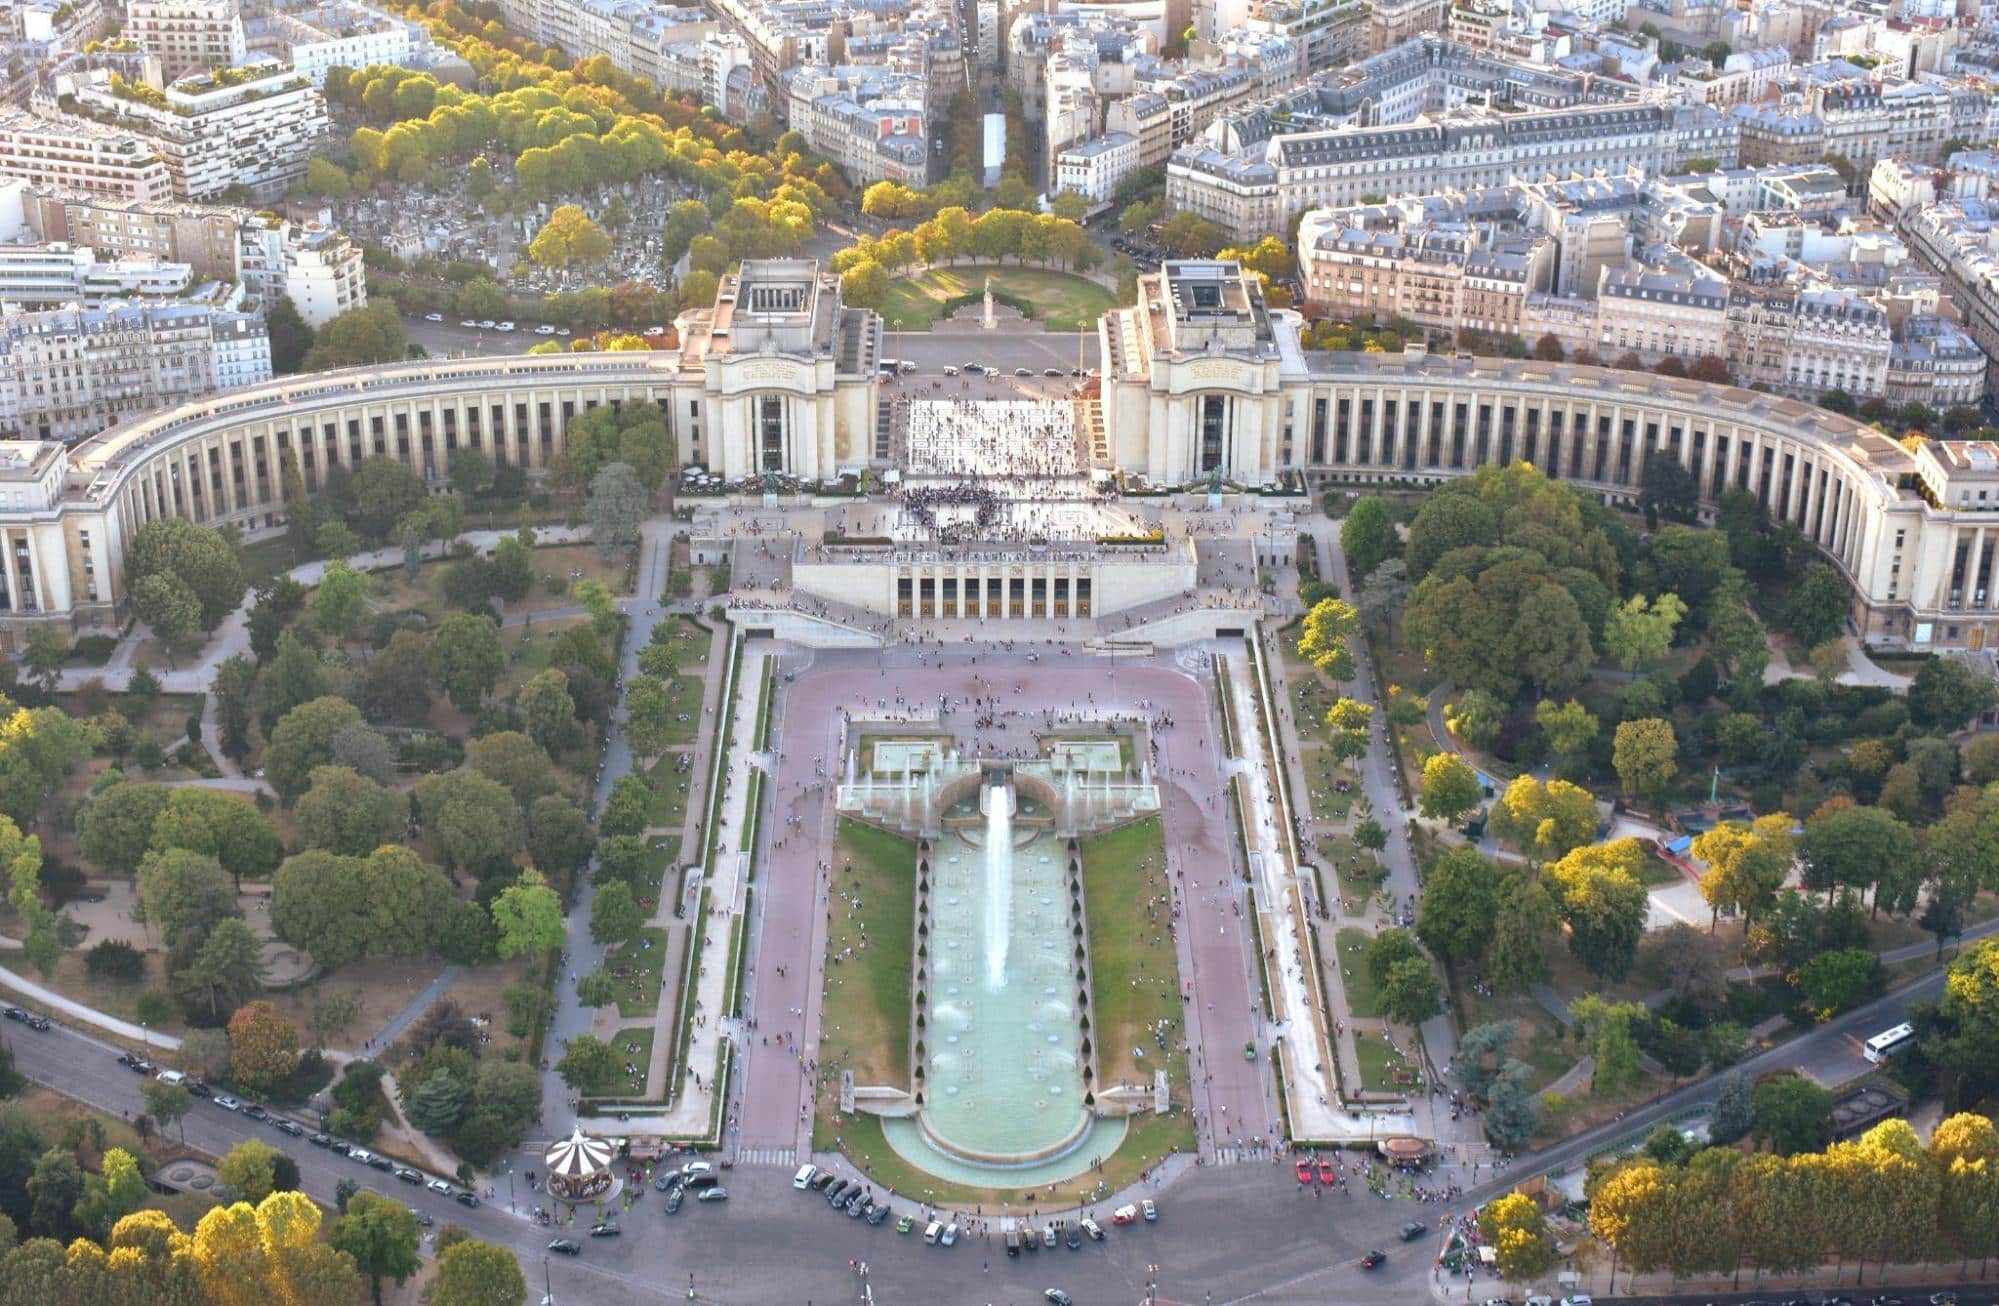 A view of the Palais de Chaillot from the top of the Eiffel Tower, Léon Azéma’s most famous building